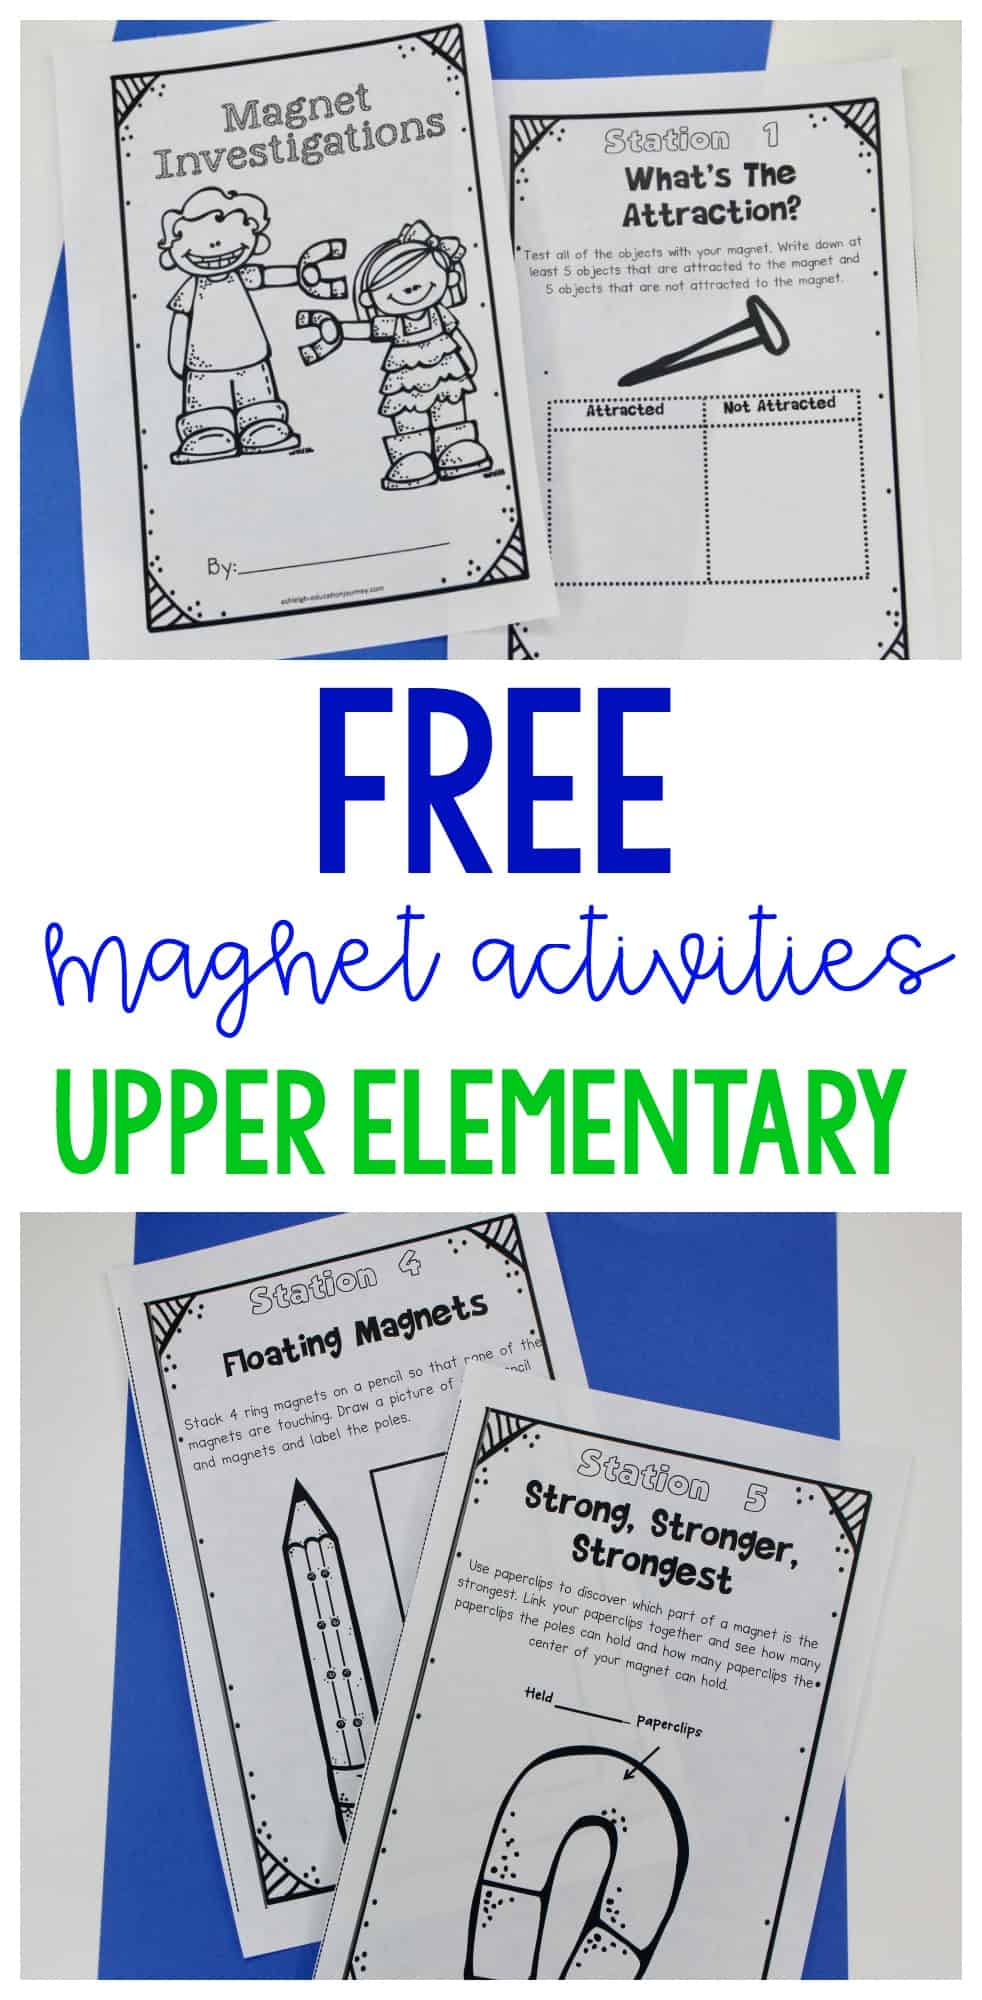 Get a FREE magnet booklet with hands-on activities for upper elementary science